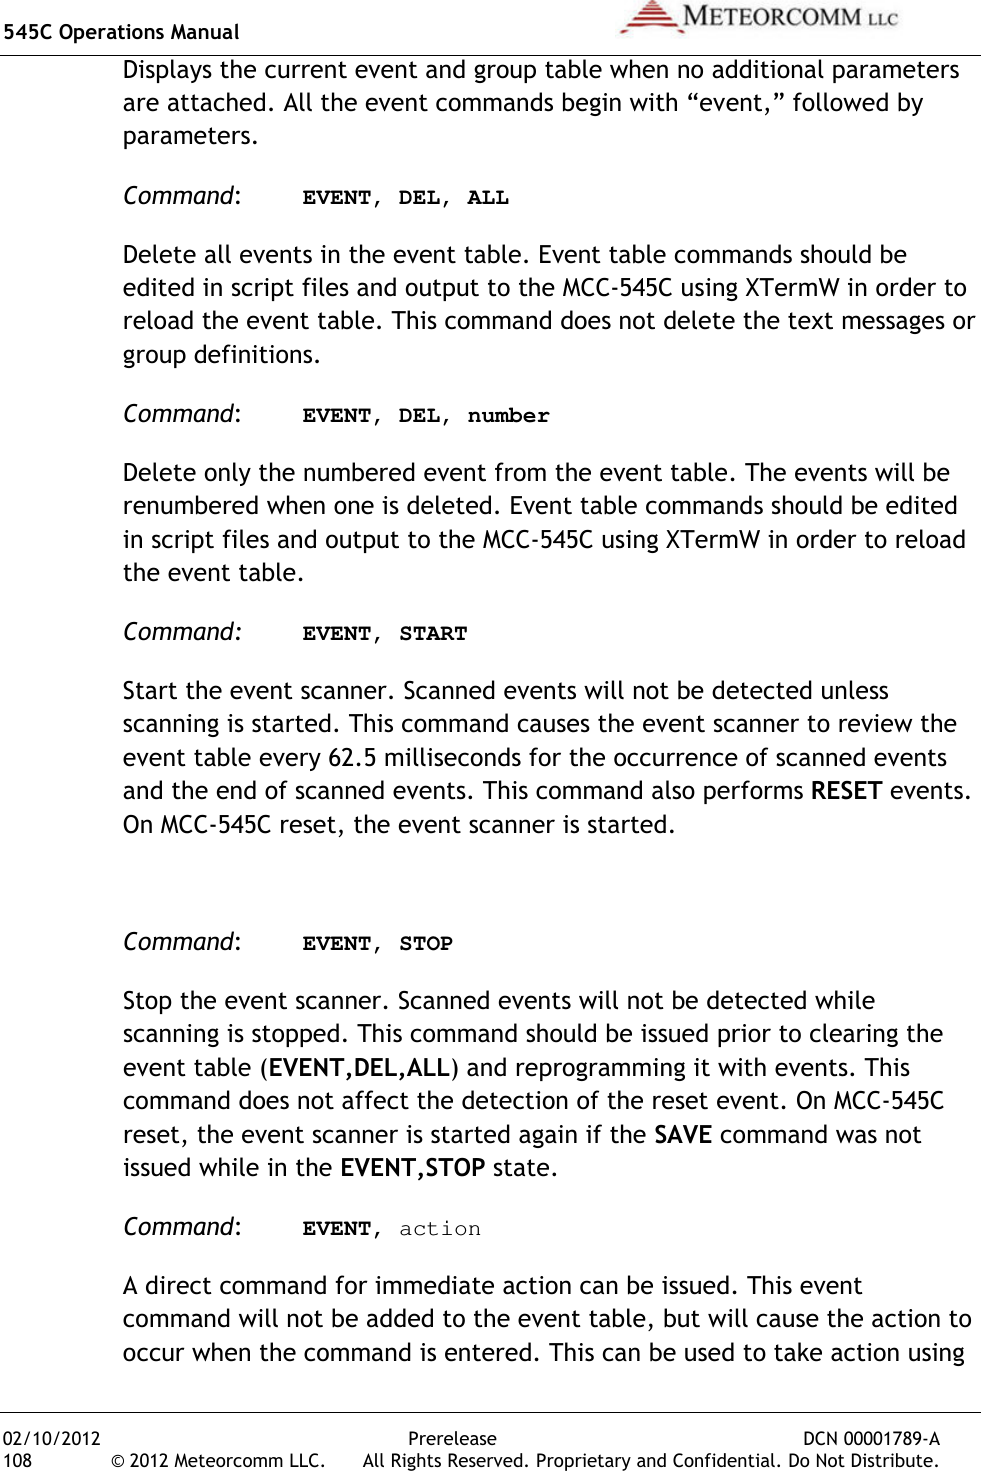 545C Operations Manual   02/10/2012  Prerelease  DCN 00001789-A 108  © 2012 Meteorcomm LLC.   All Rights Reserved. Proprietary and Confidential. Do Not Distribute. Displays the current event and group table when no additional parameters are attached. All the event commands begin with “event,” followed by parameters. Command:  EVENT, DEL, ALL Delete all events in the event table. Event table commands should be edited in script files and output to the MCC-545C using XTermW in order to reload the event table. This command does not delete the text messages or group definitions. Command:  EVENT, DEL, number Delete only the numbered event from the event table. The events will be renumbered when one is deleted. Event table commands should be edited in script files and output to the MCC-545C using XTermW in order to reload the event table. Command: EVENT, START Start the event scanner. Scanned events will not be detected unless scanning is started. This command causes the event scanner to review the event table every 62.5 milliseconds for the occurrence of scanned events and the end of scanned events. This command also performs RESET events. On MCC-545C reset, the event scanner is started.  Command:  EVENT, STOP Stop the event scanner. Scanned events will not be detected while scanning is stopped. This command should be issued prior to clearing the event table (EVENT,DEL,ALL) and reprogramming it with events. This command does not affect the detection of the reset event. On MCC-545C reset, the event scanner is started again if the SAVE command was not issued while in the EVENT,STOP state. Command:  EVENT, action A direct command for immediate action can be issued. This event command will not be added to the event table, but will cause the action to occur when the command is entered. This can be used to take action using 